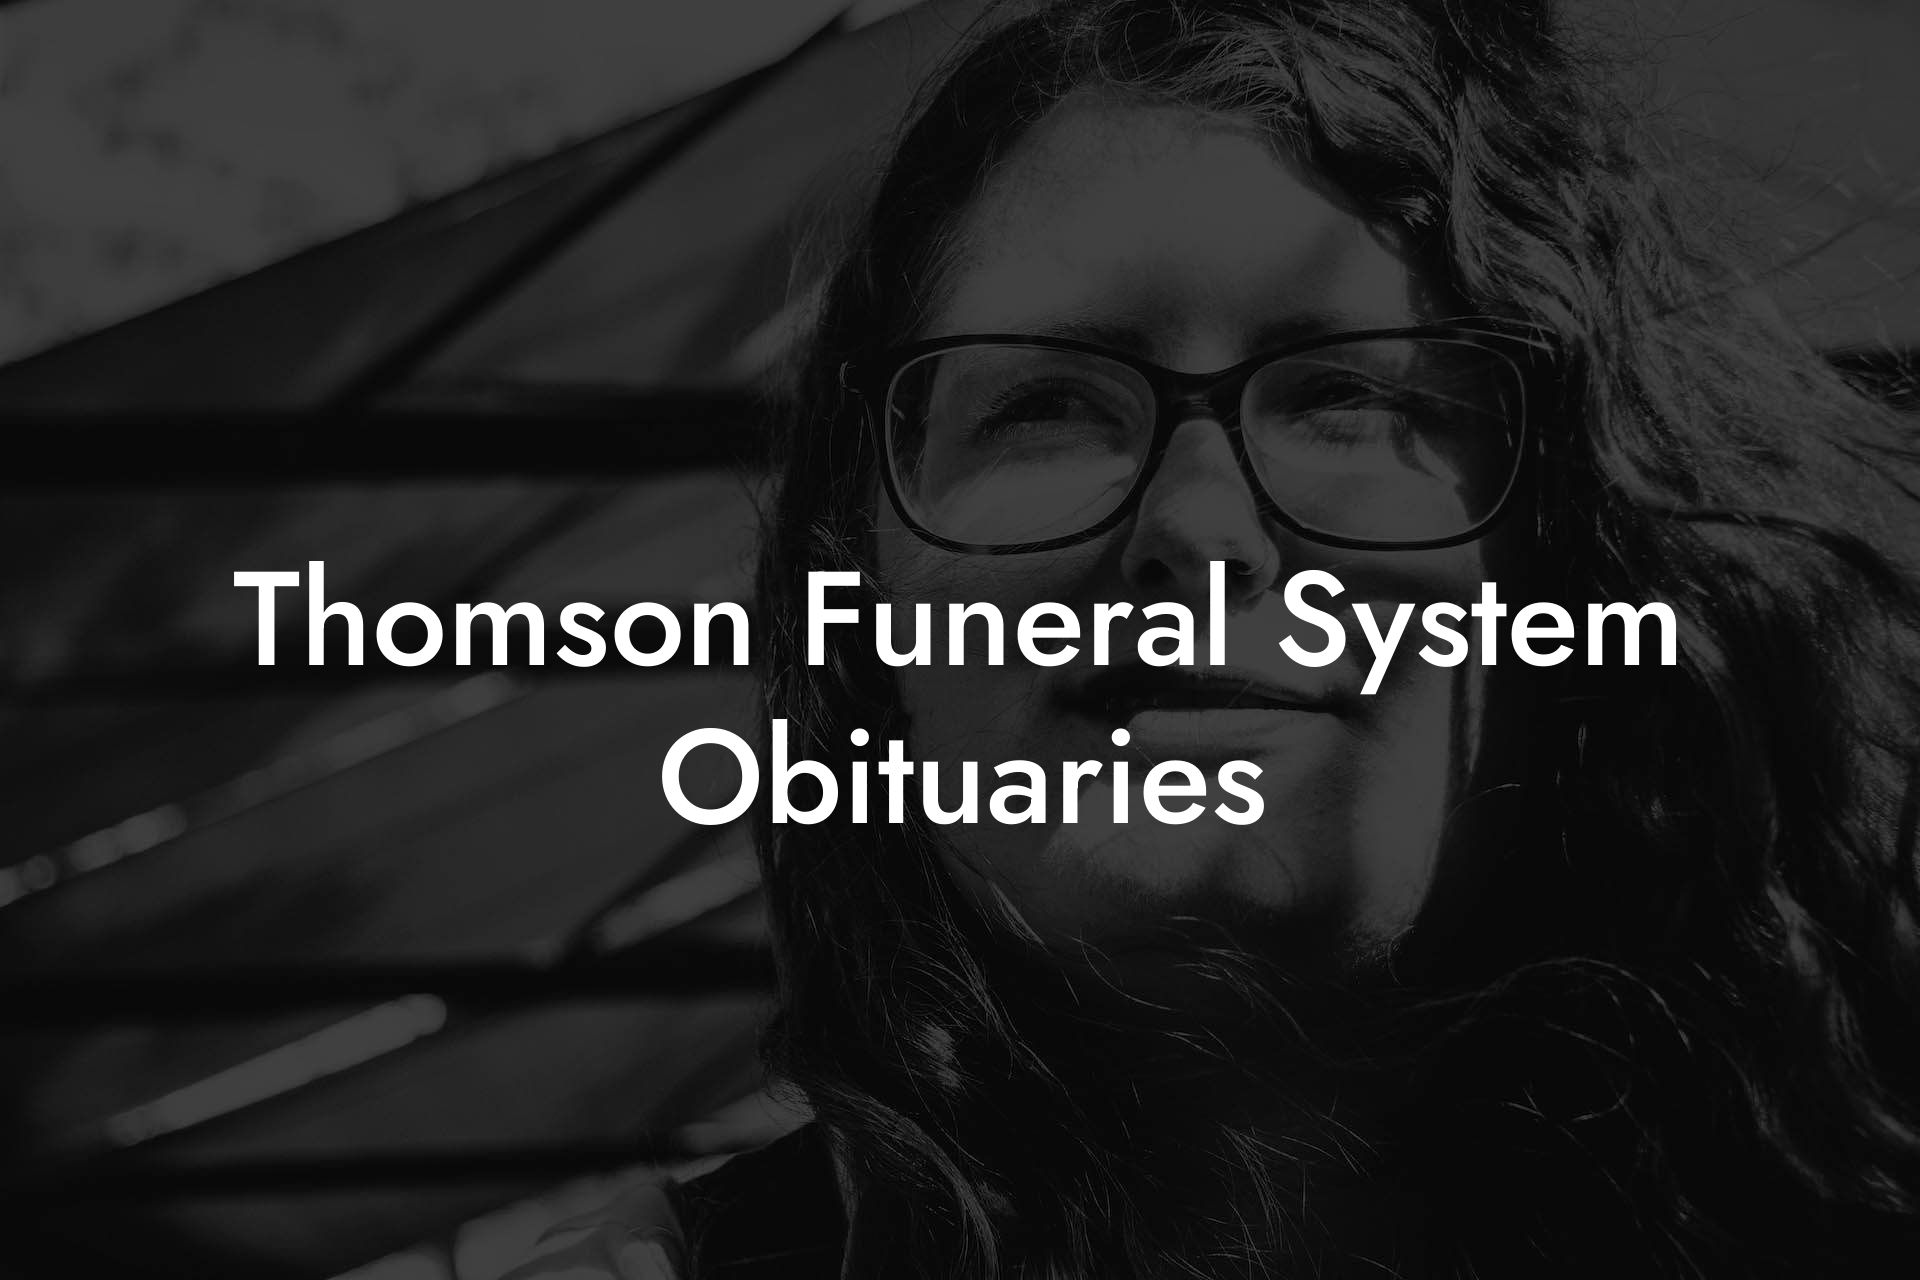 Thomson Funeral System Obituaries